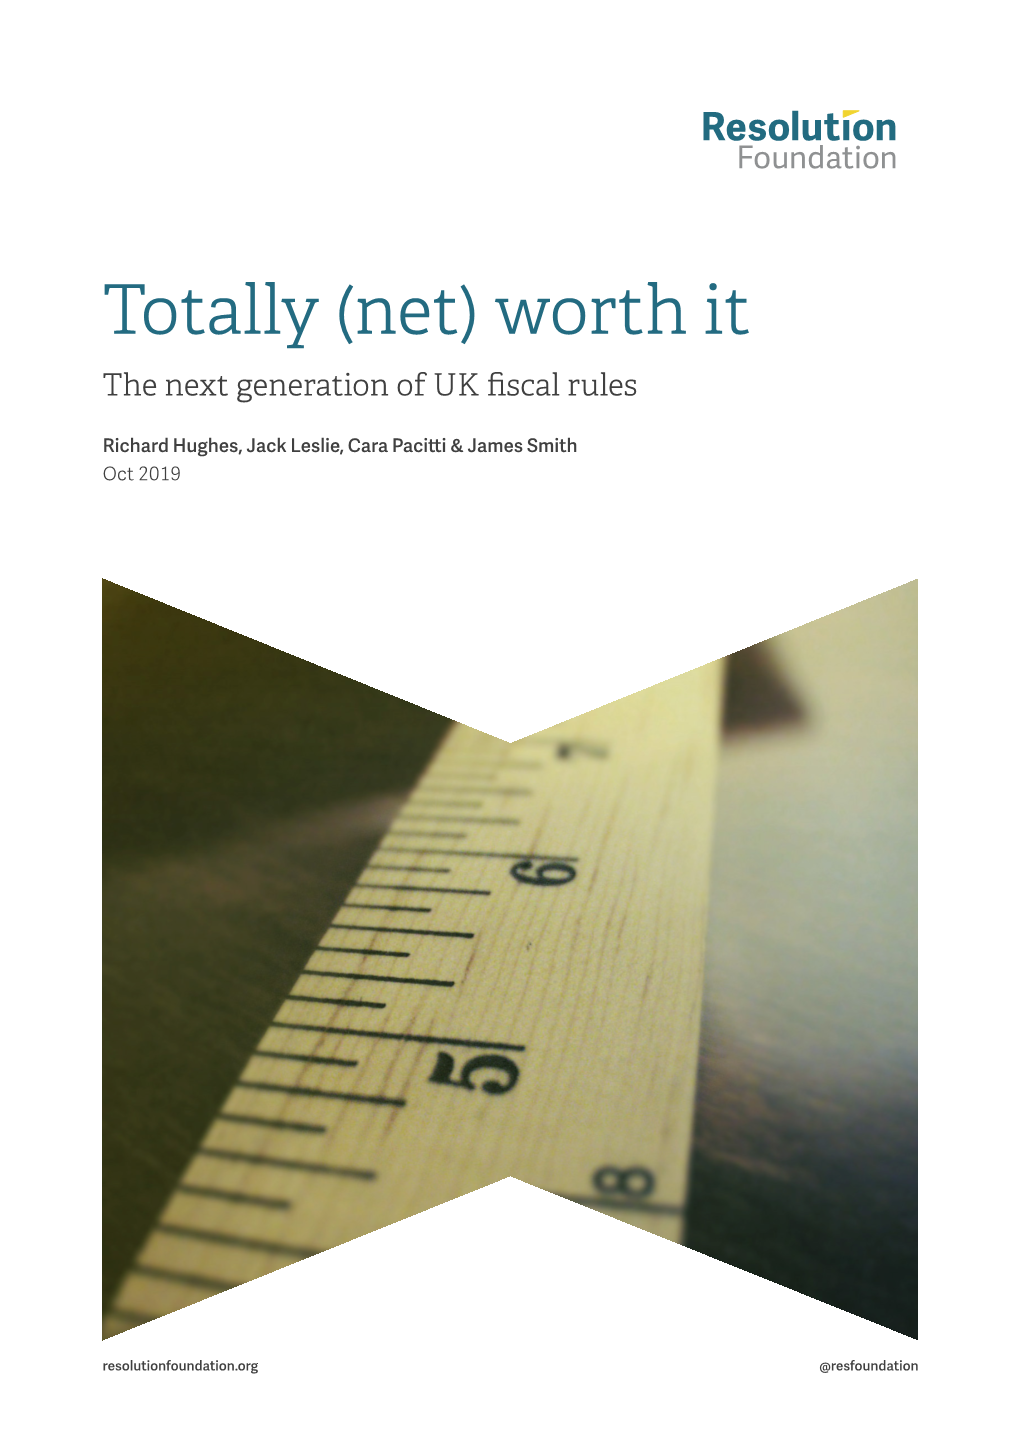 Totally (Net) Worth It: the Next Generation of UK Fiscal